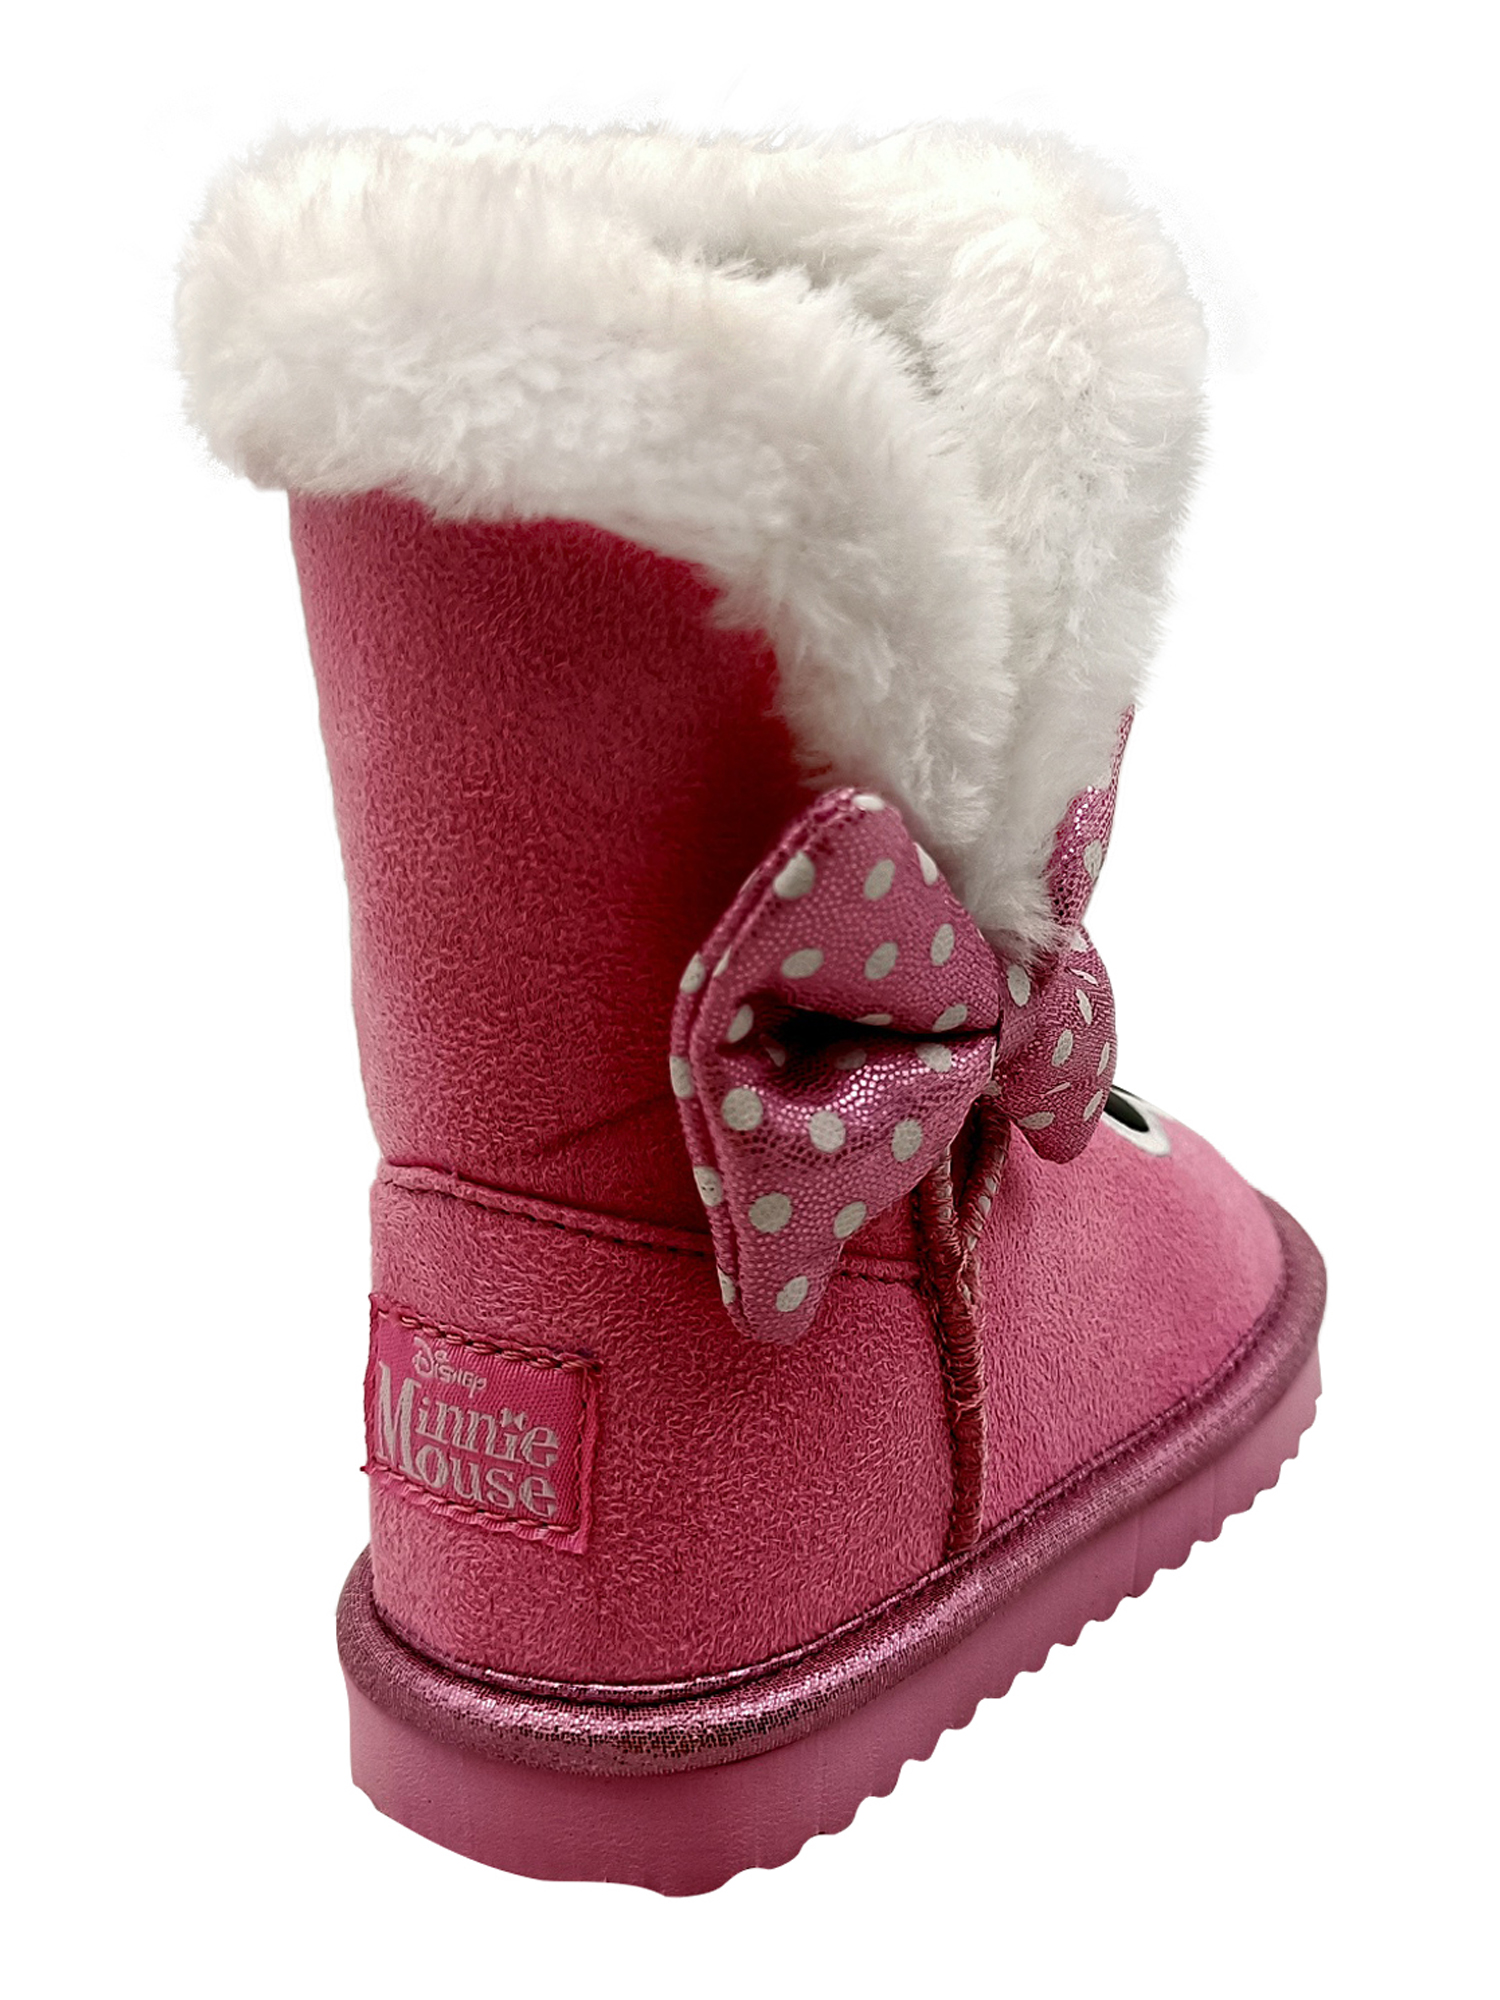 Disney Minnie Mouse Cozy Faux Shearling Winter Boot (Toddler Girls) - image 3 of 6